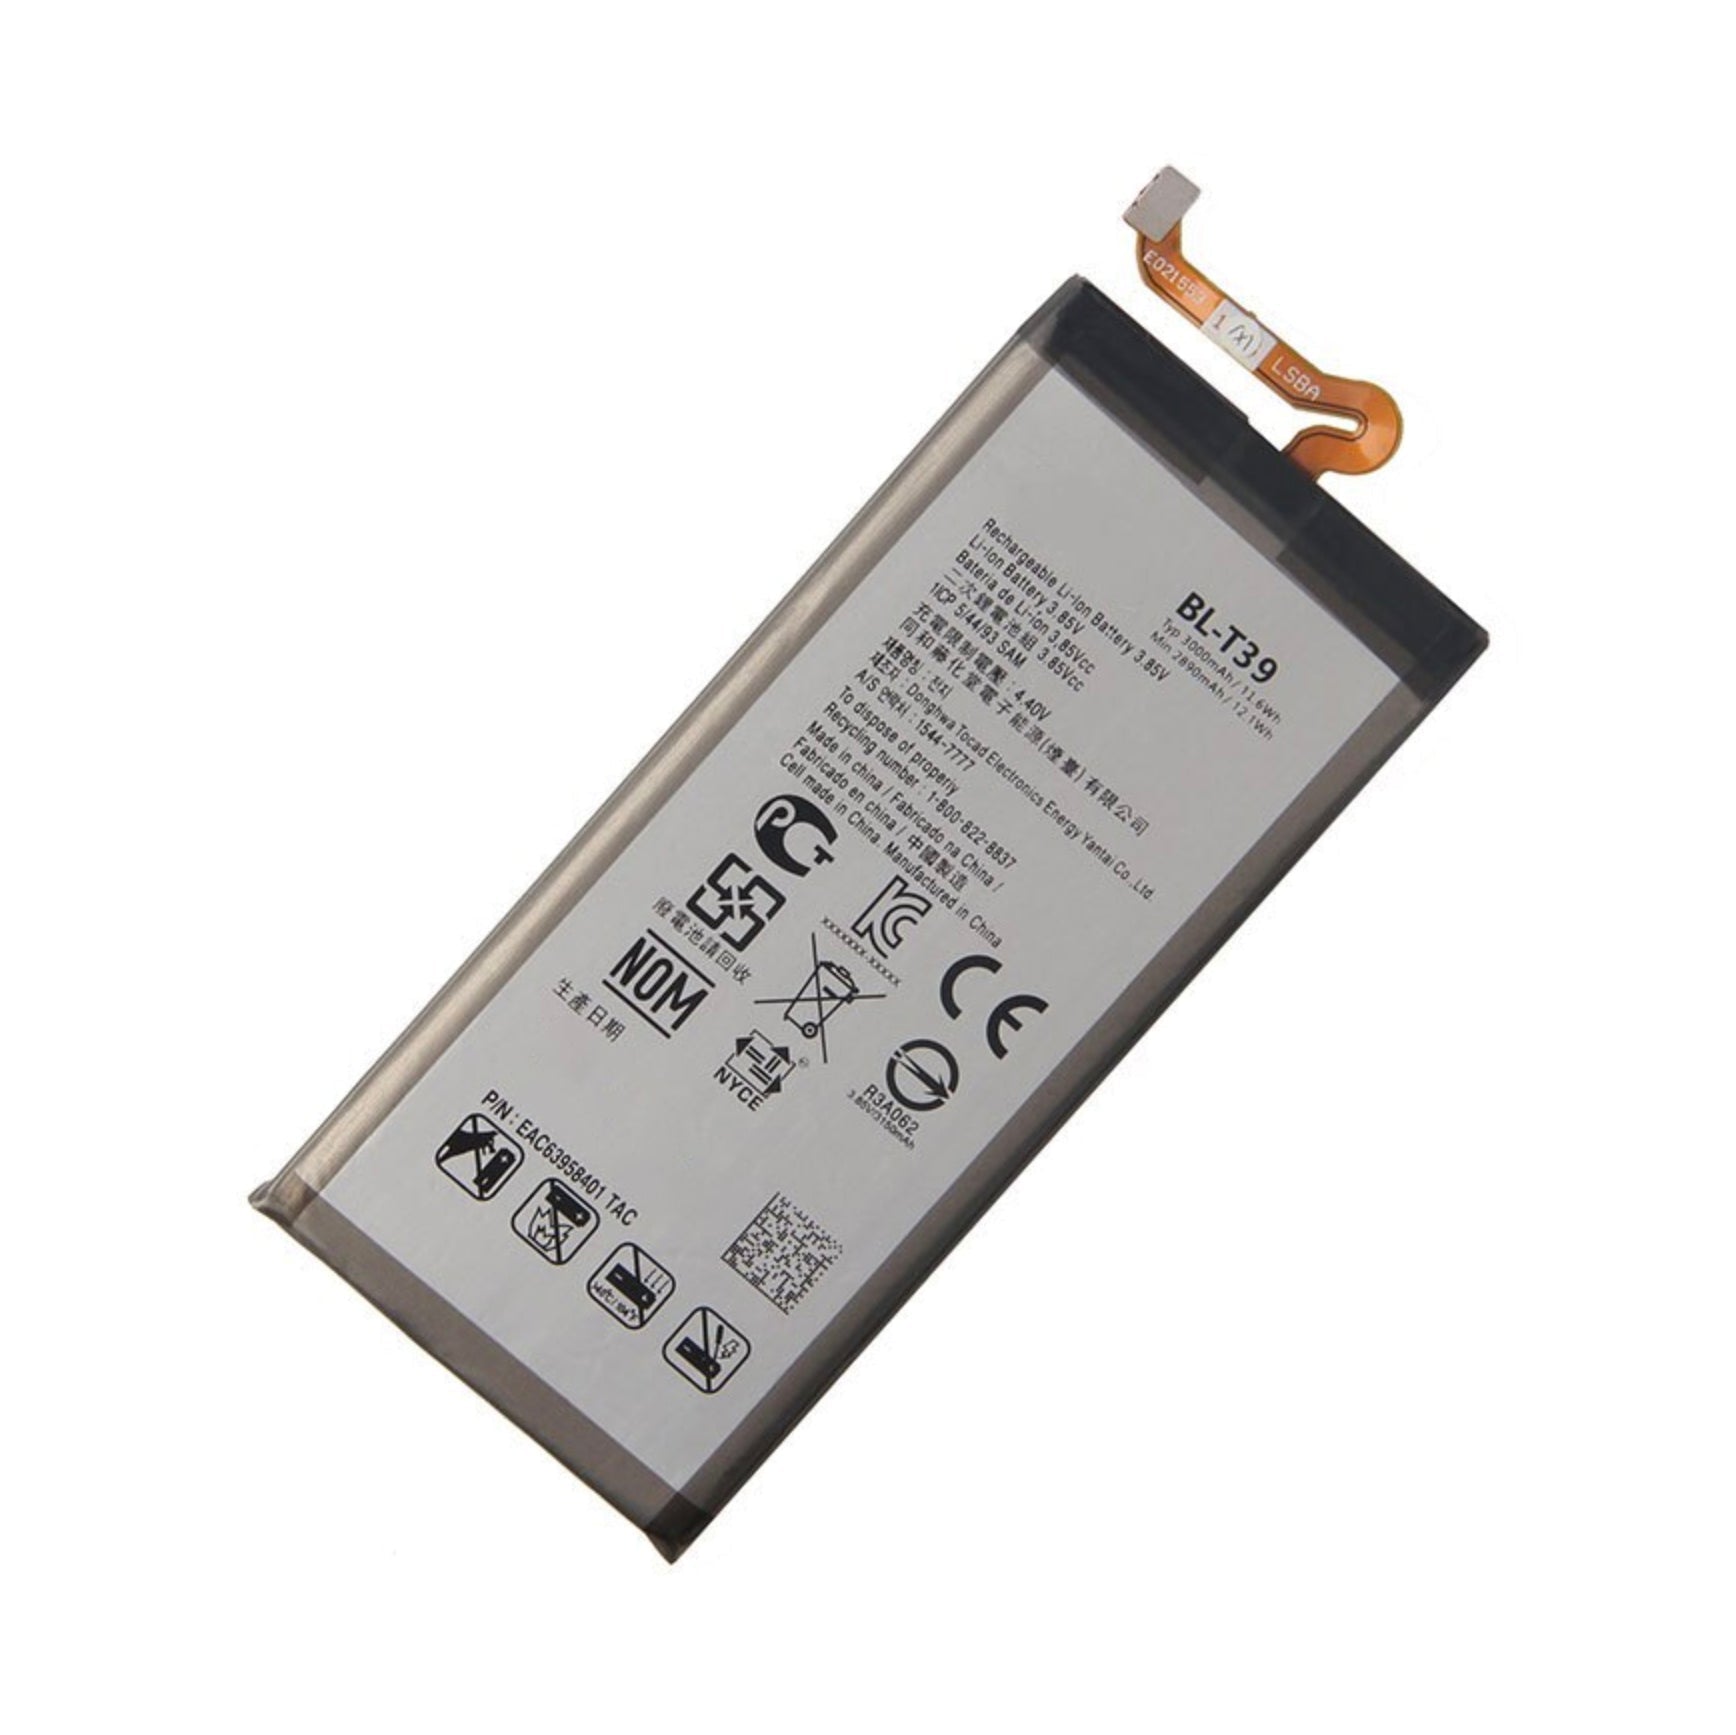 Replacement Battery For LG G7 ThinQ | BL-T39-Mobile Phone Parts-First Help Tech